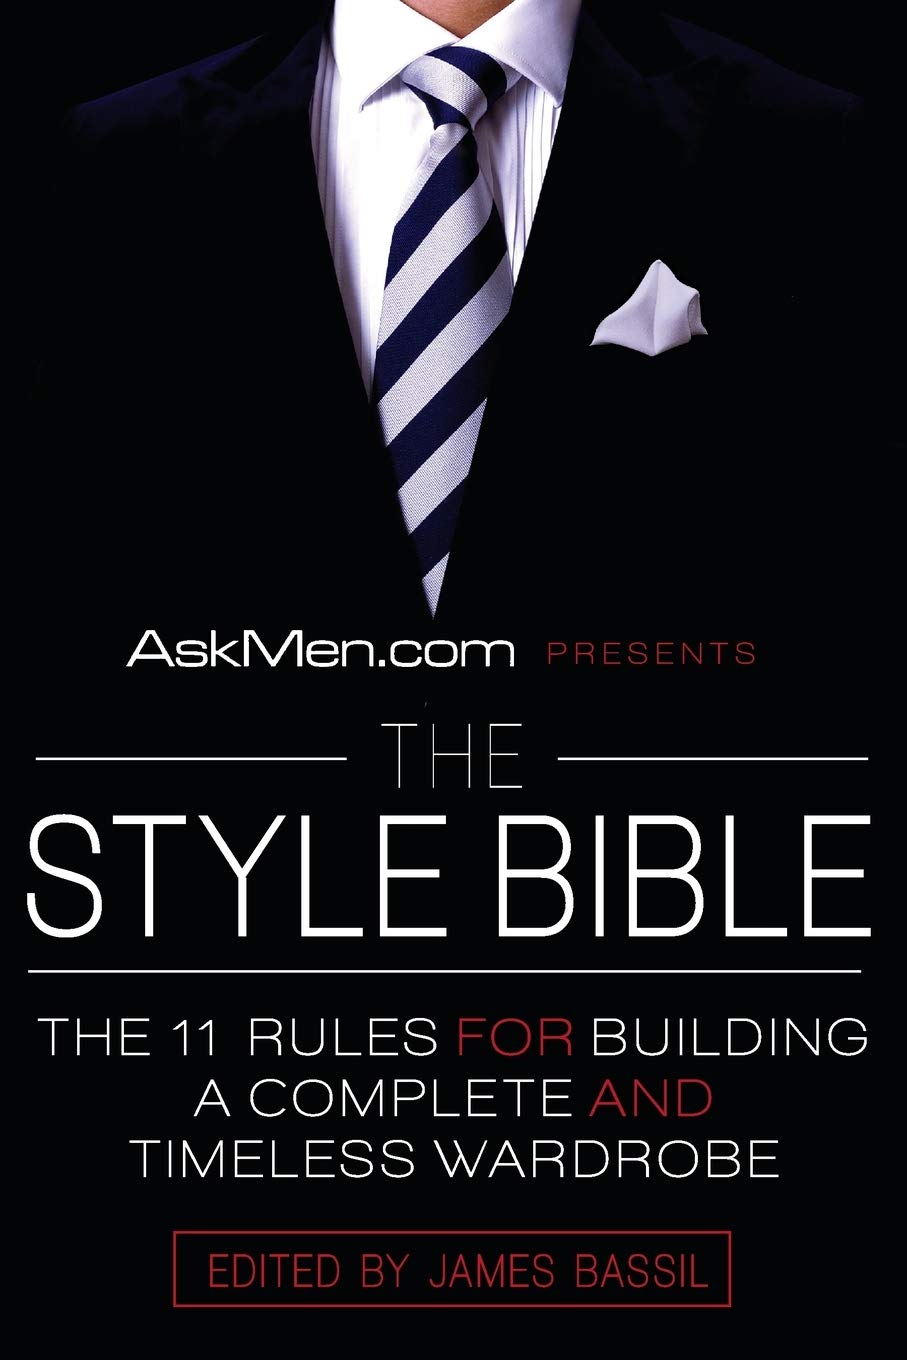 AskMen.com Presents The Style Bible: The 11 Rules for Building a Complete and Timeless Wardrobe (Askmen.com Series, 2)